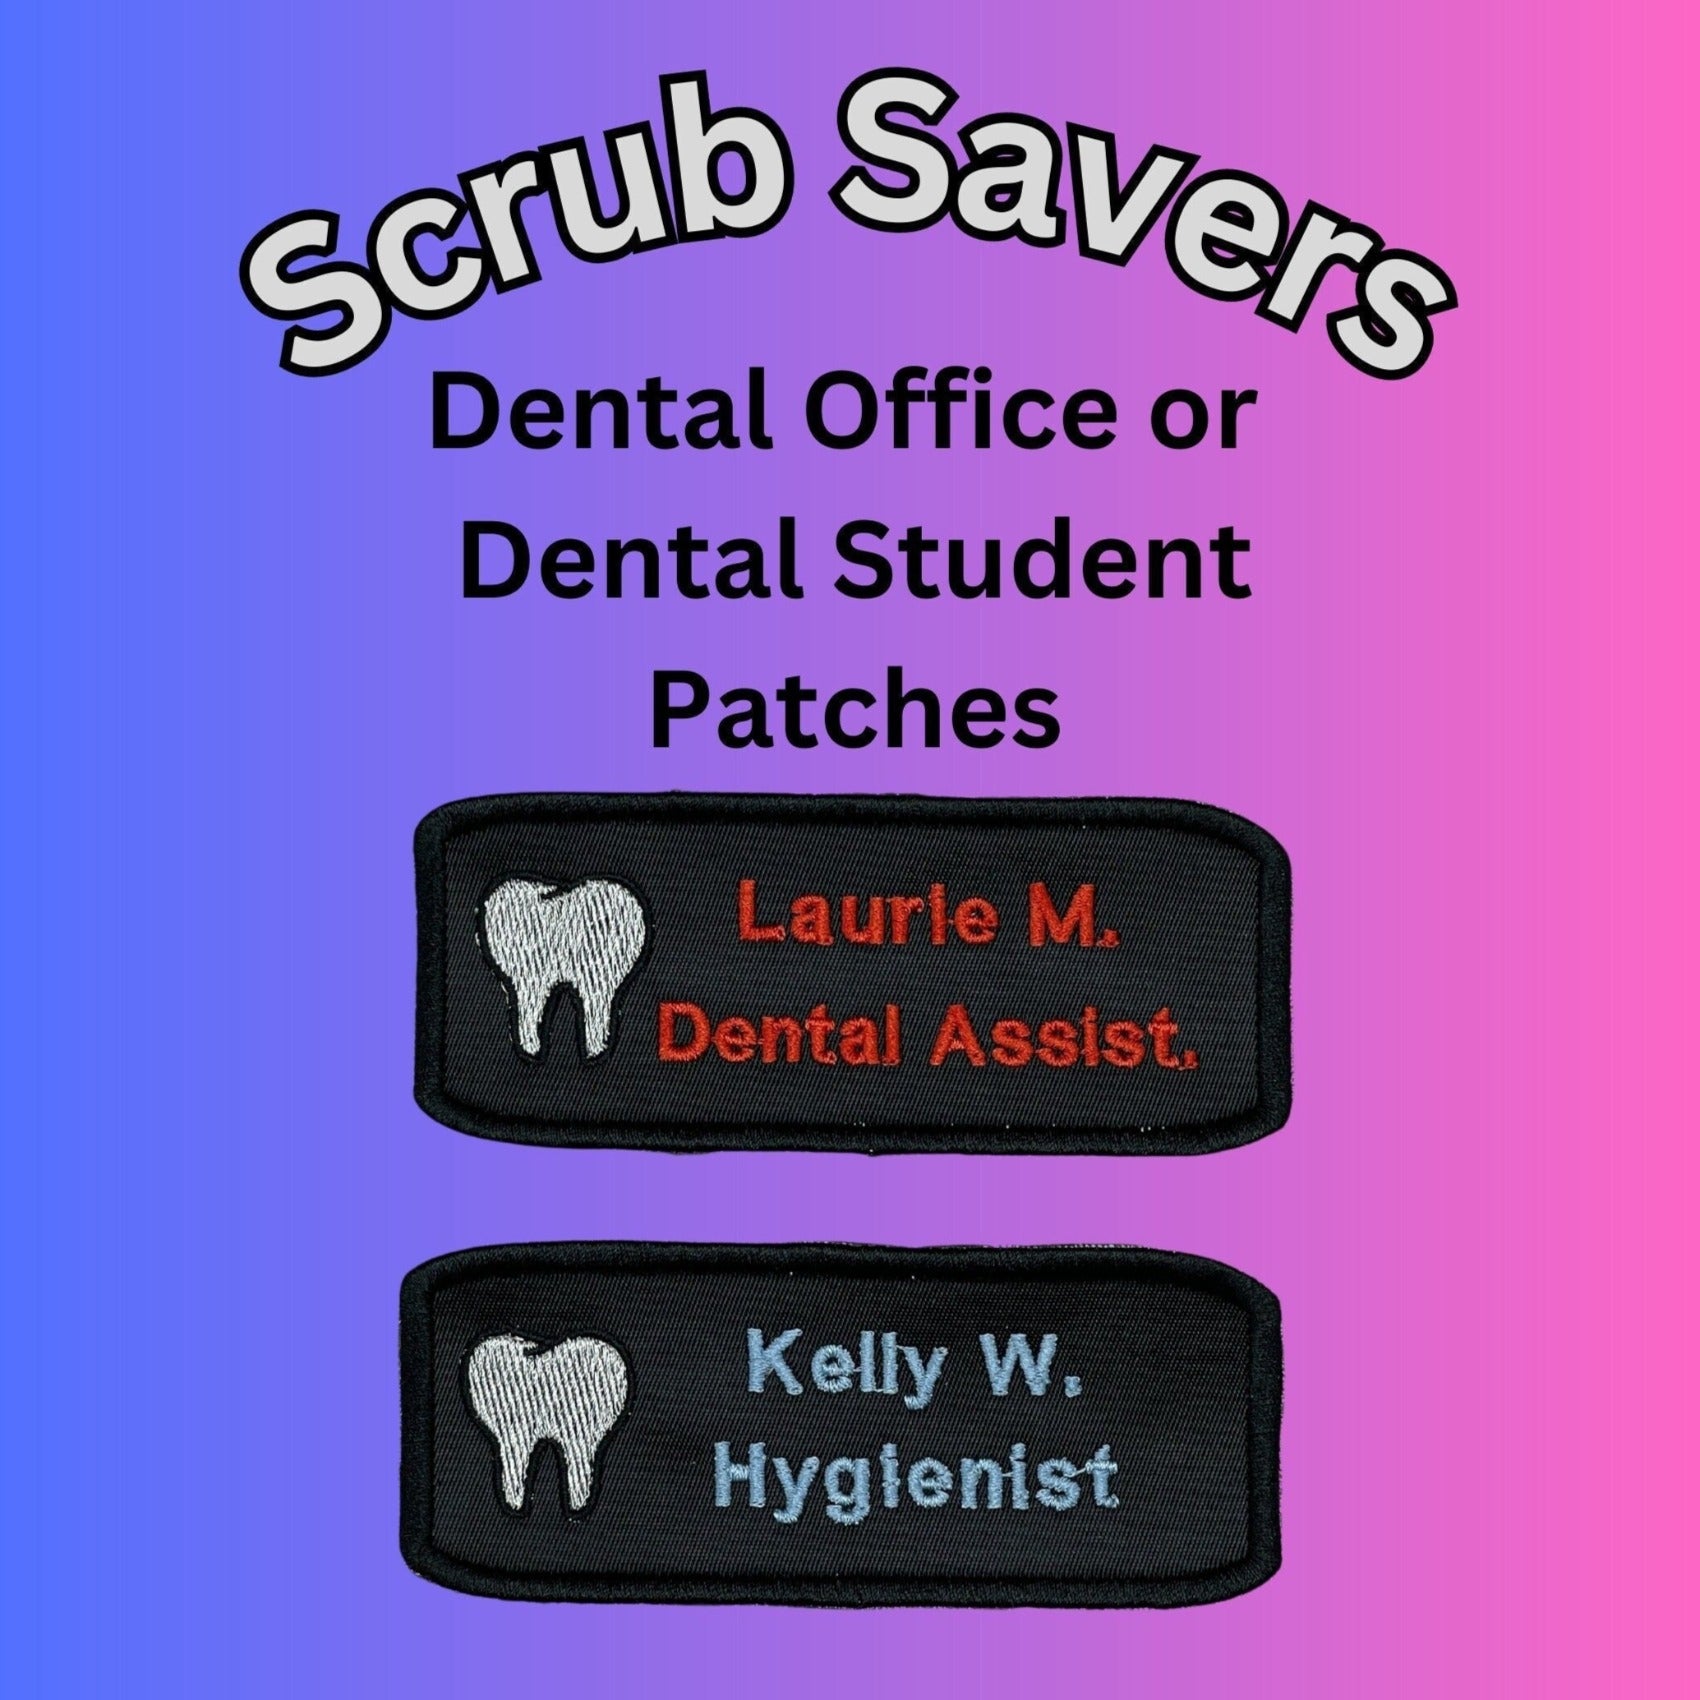 Embroidered patch for dental staff personalized with name and position or credentials